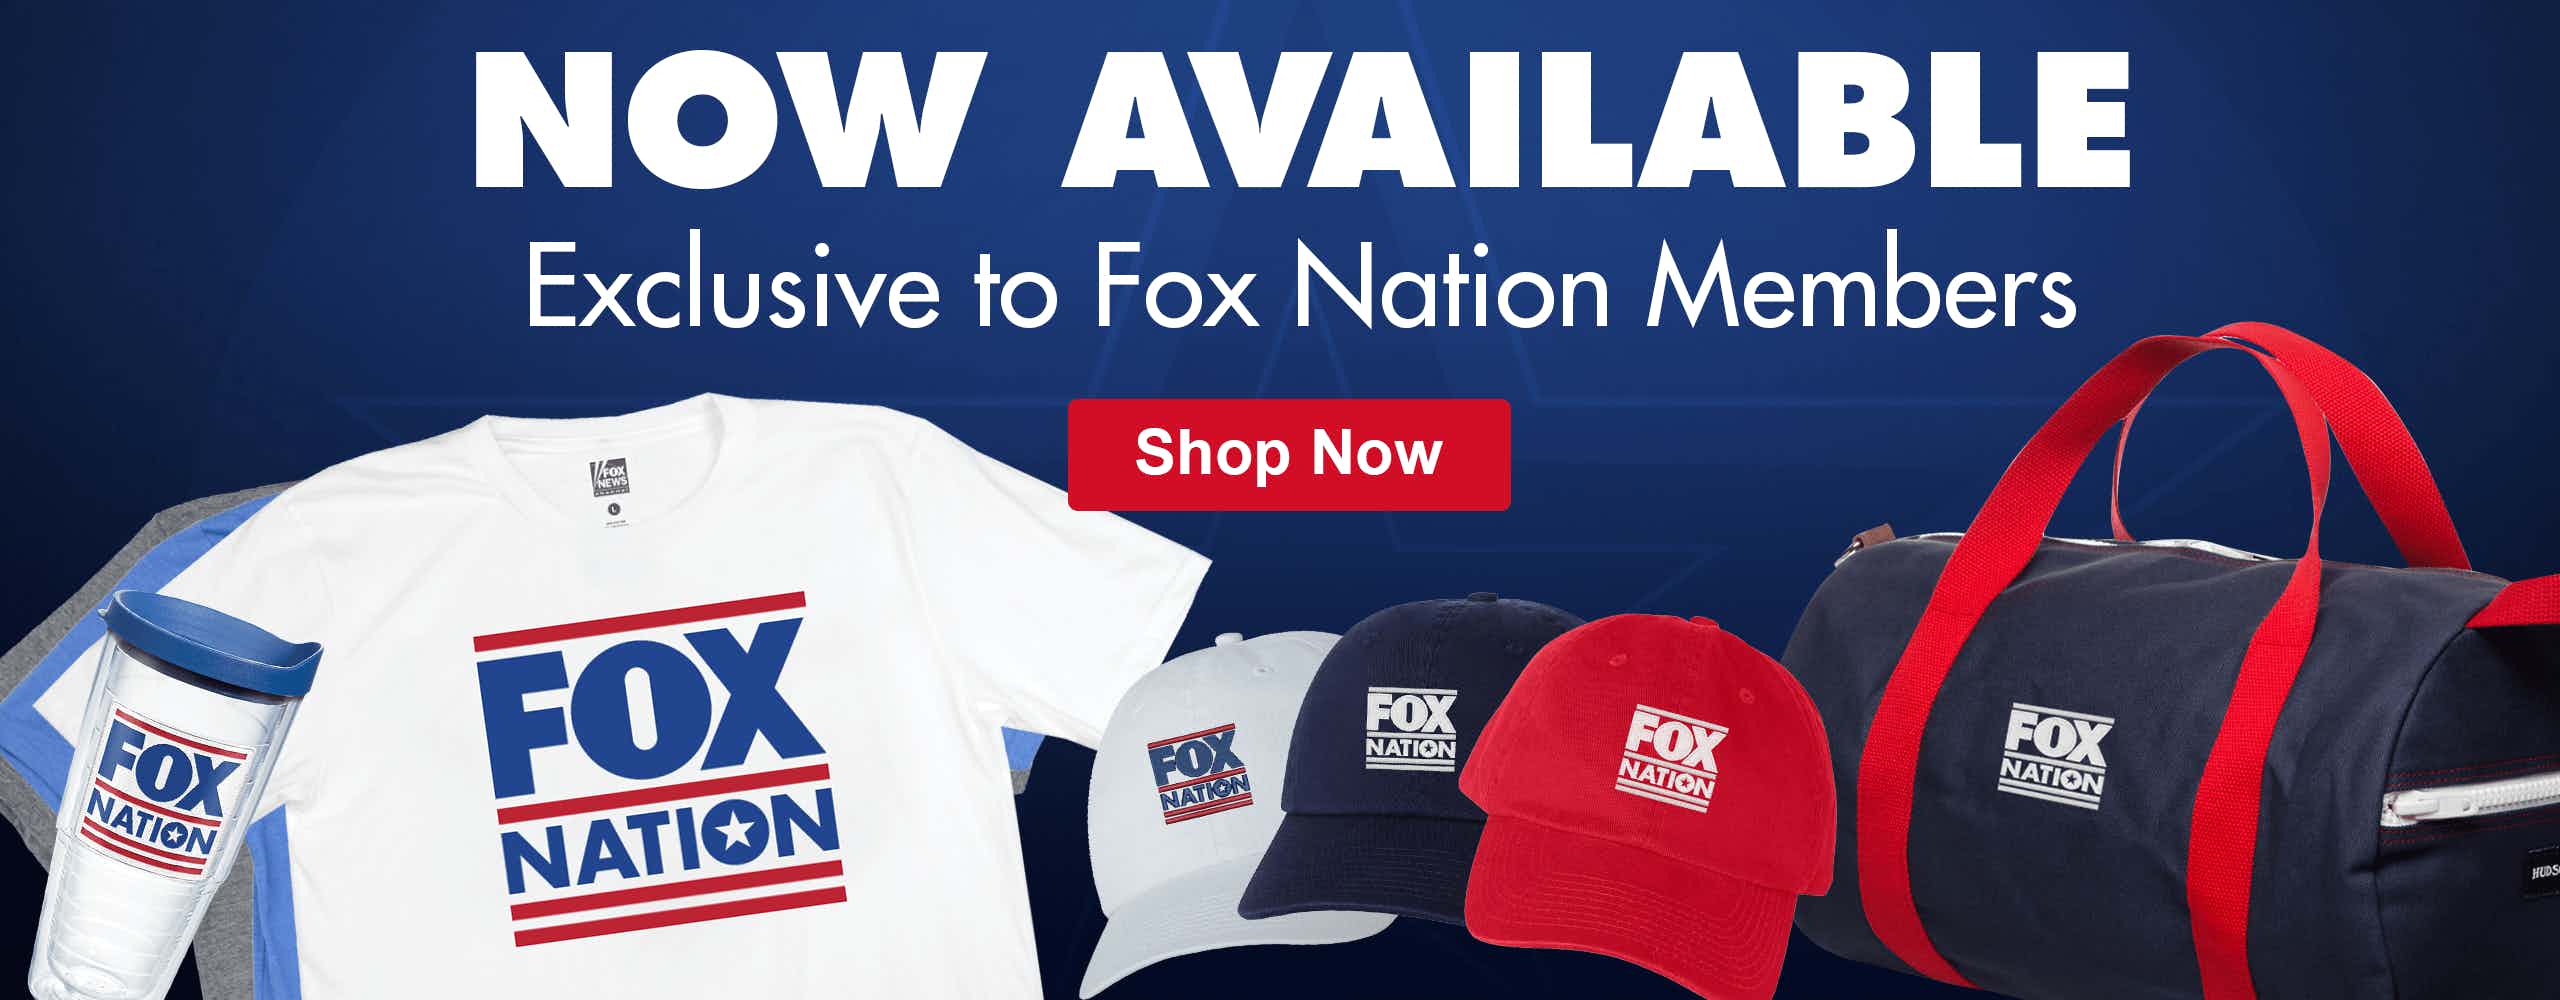 Exclusive Fox Nation Members Products